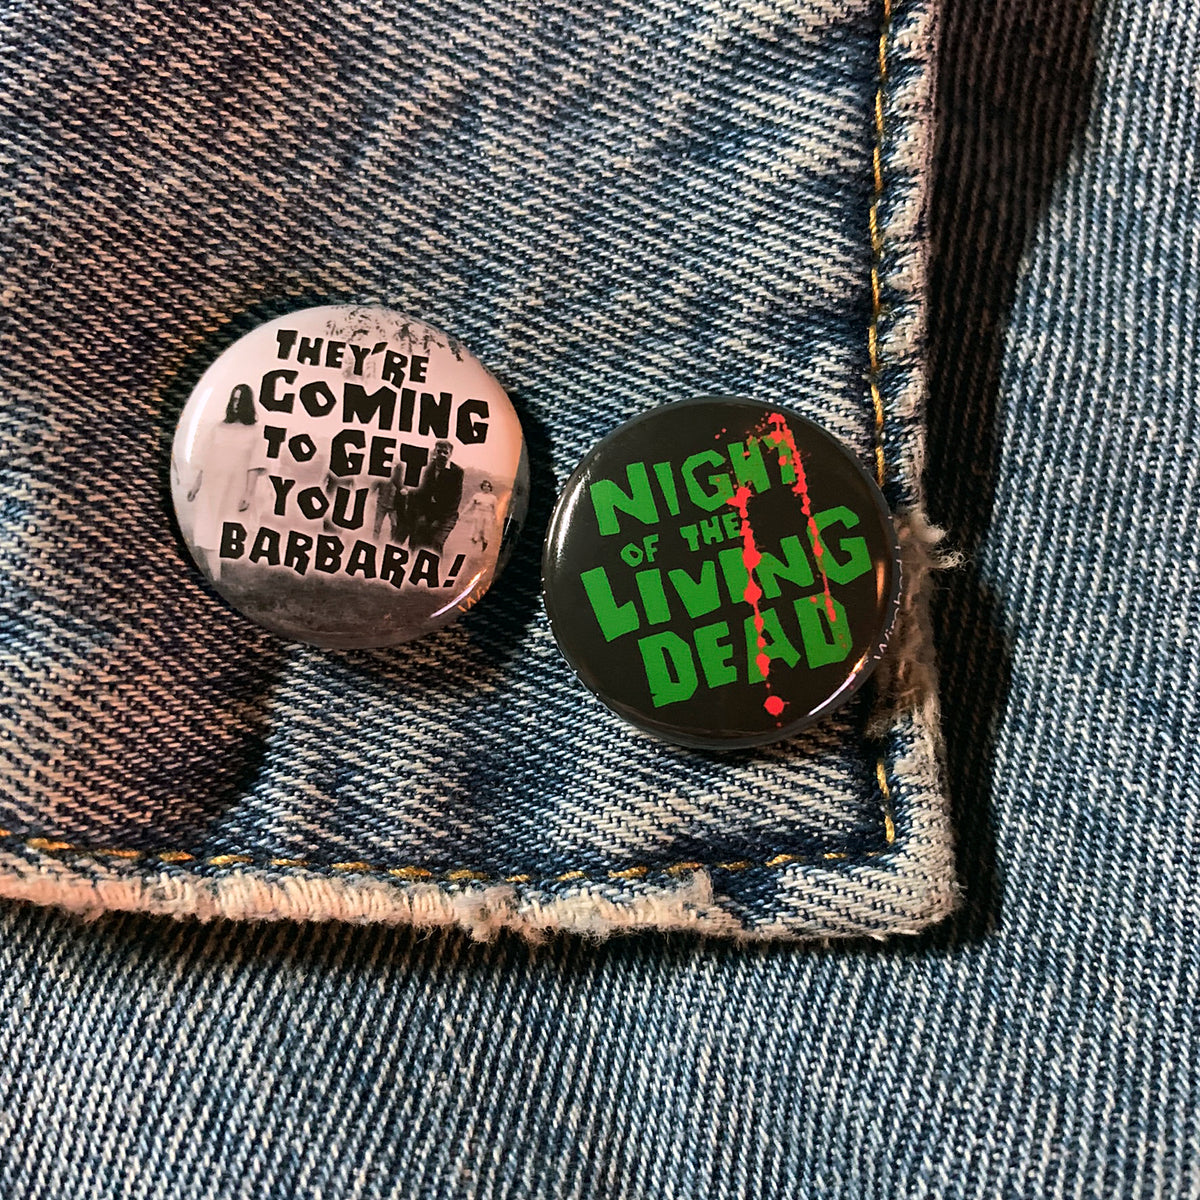 Night of the Living Dead Buttons! Two classic 1" pins.